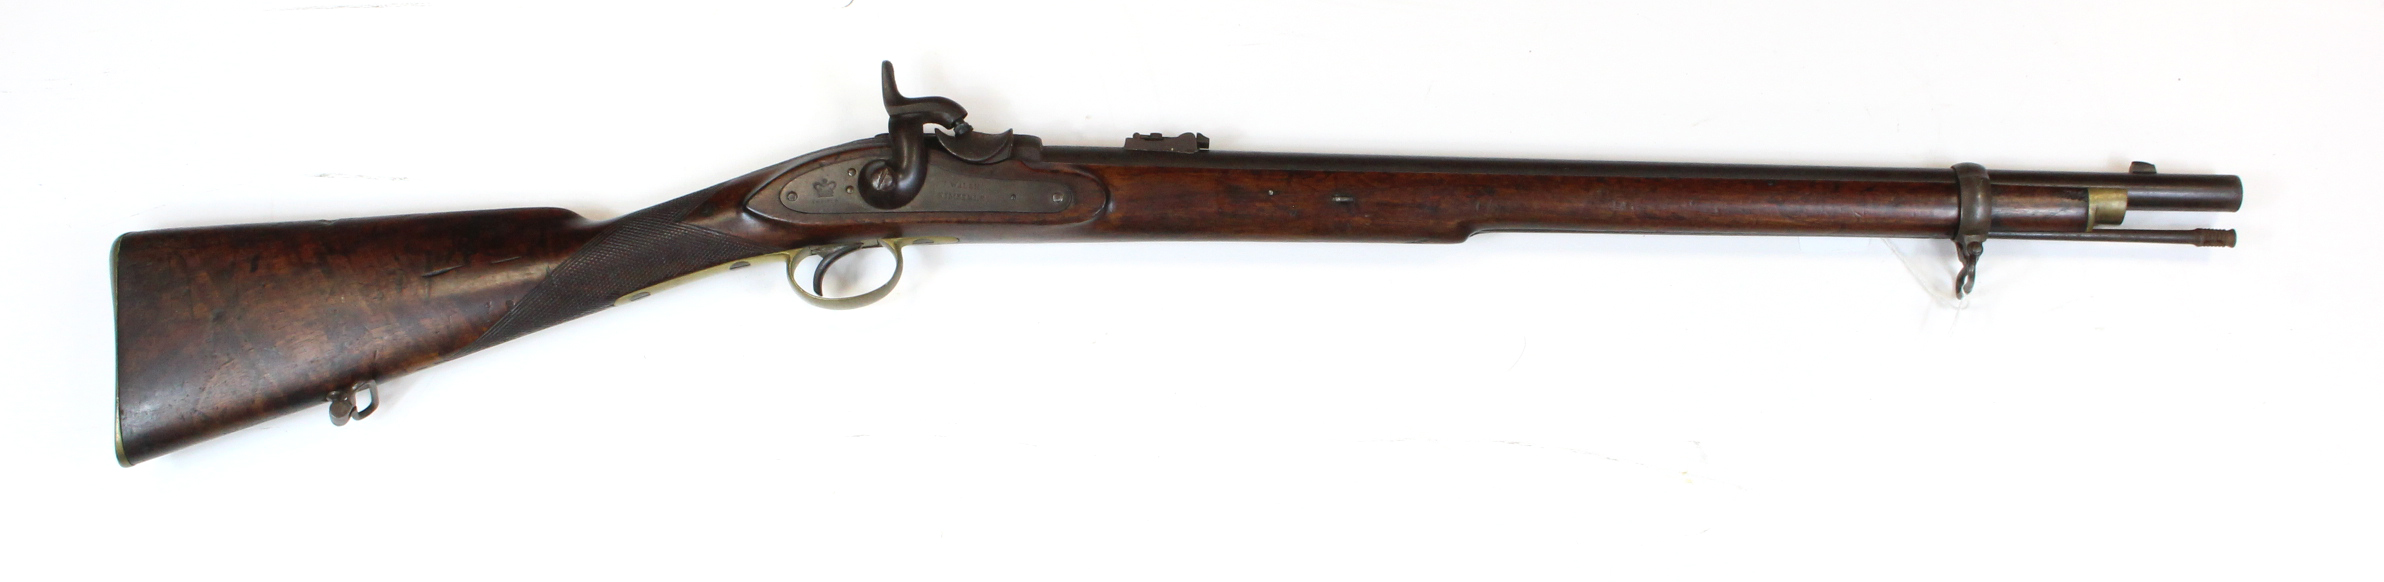 South African mid 19th century Volunteers short rifle with 26 inch barrel, with single barrel band